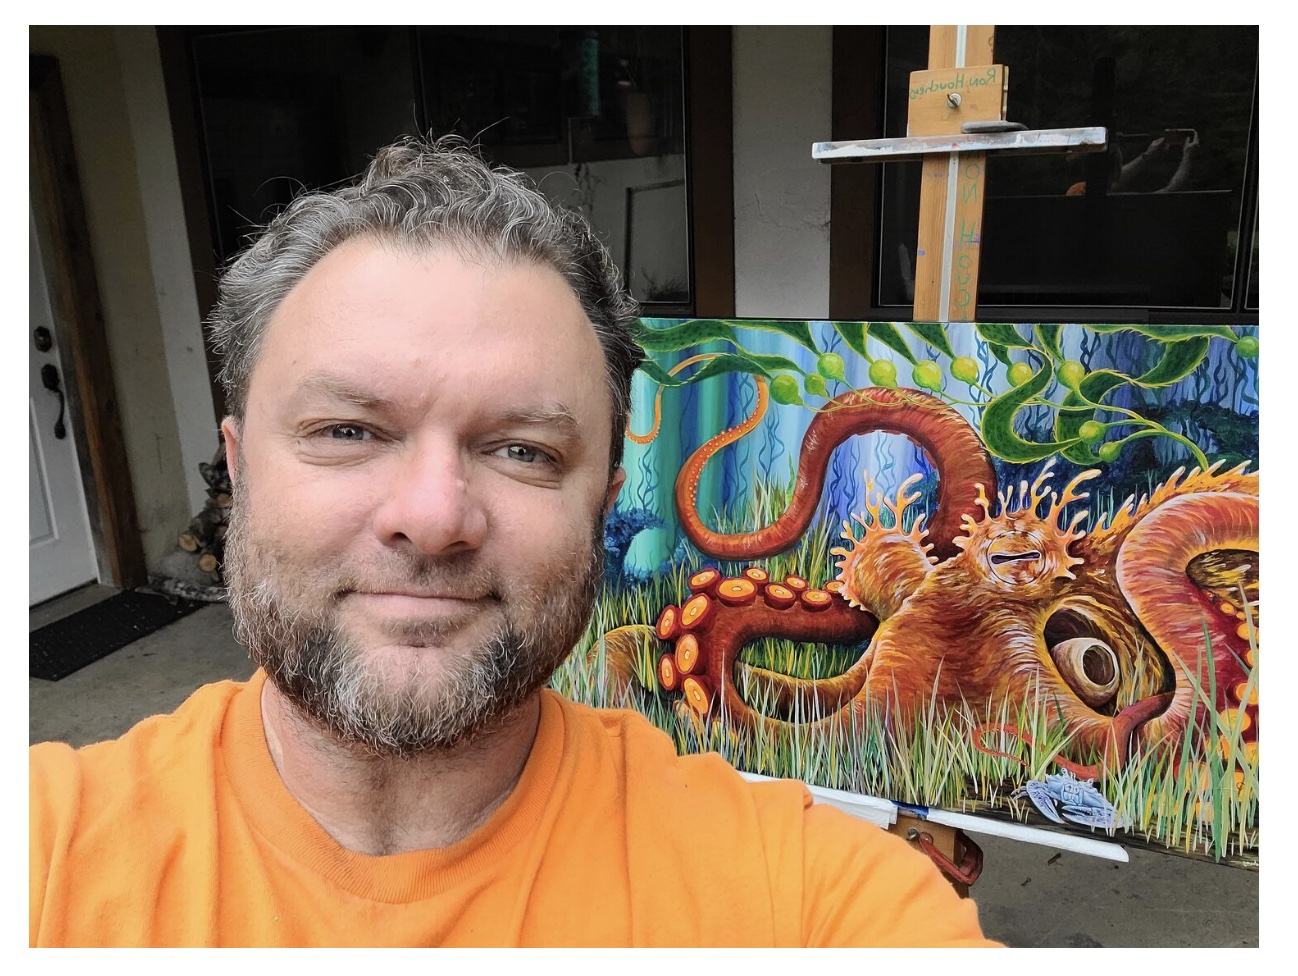 A man with short curly grayish hair. He is standing in front of a. mural showing a big octopus.